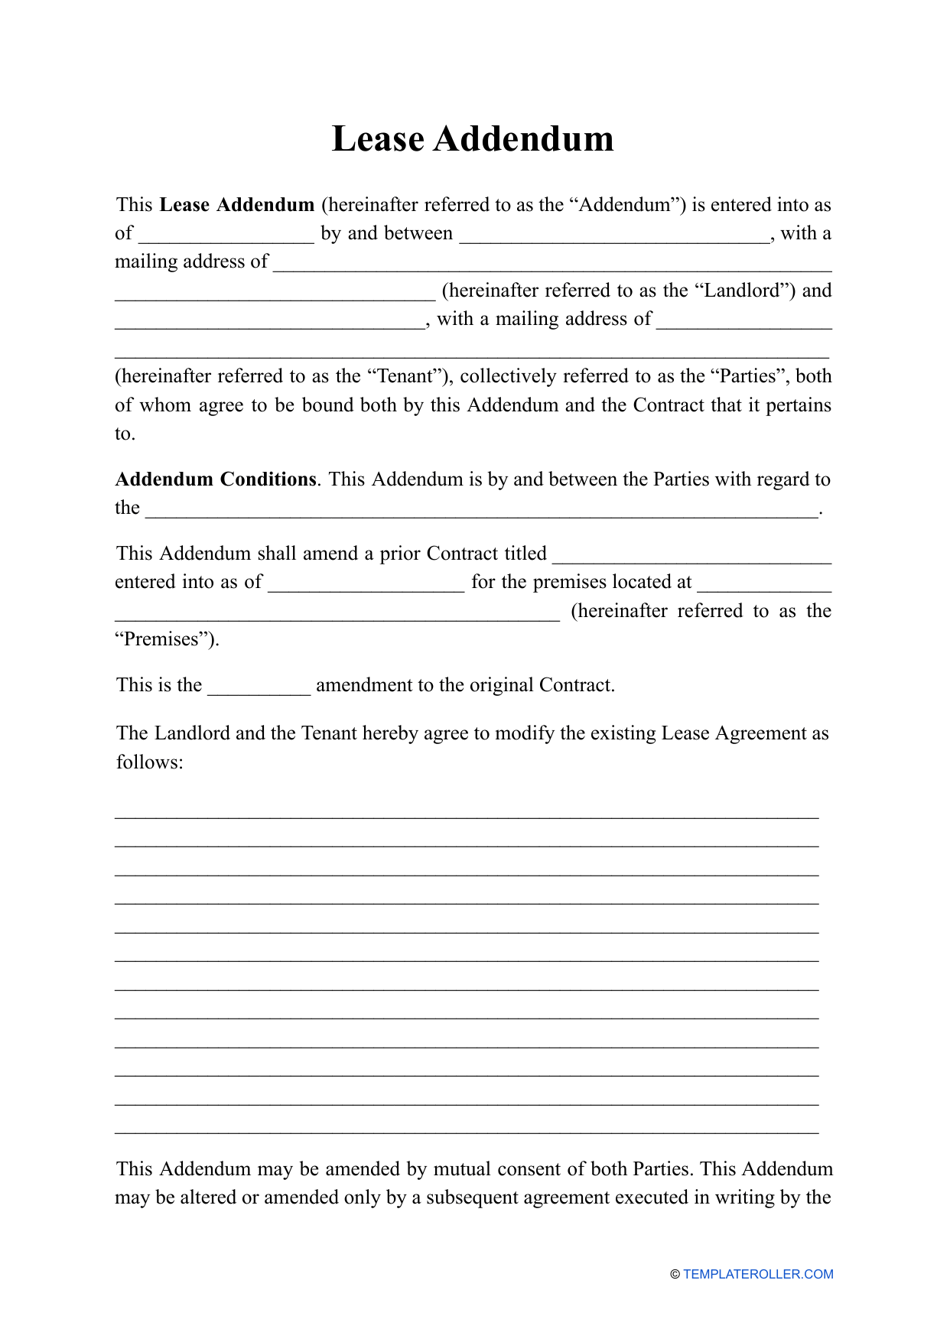 Lease Addendum Template, Page 1